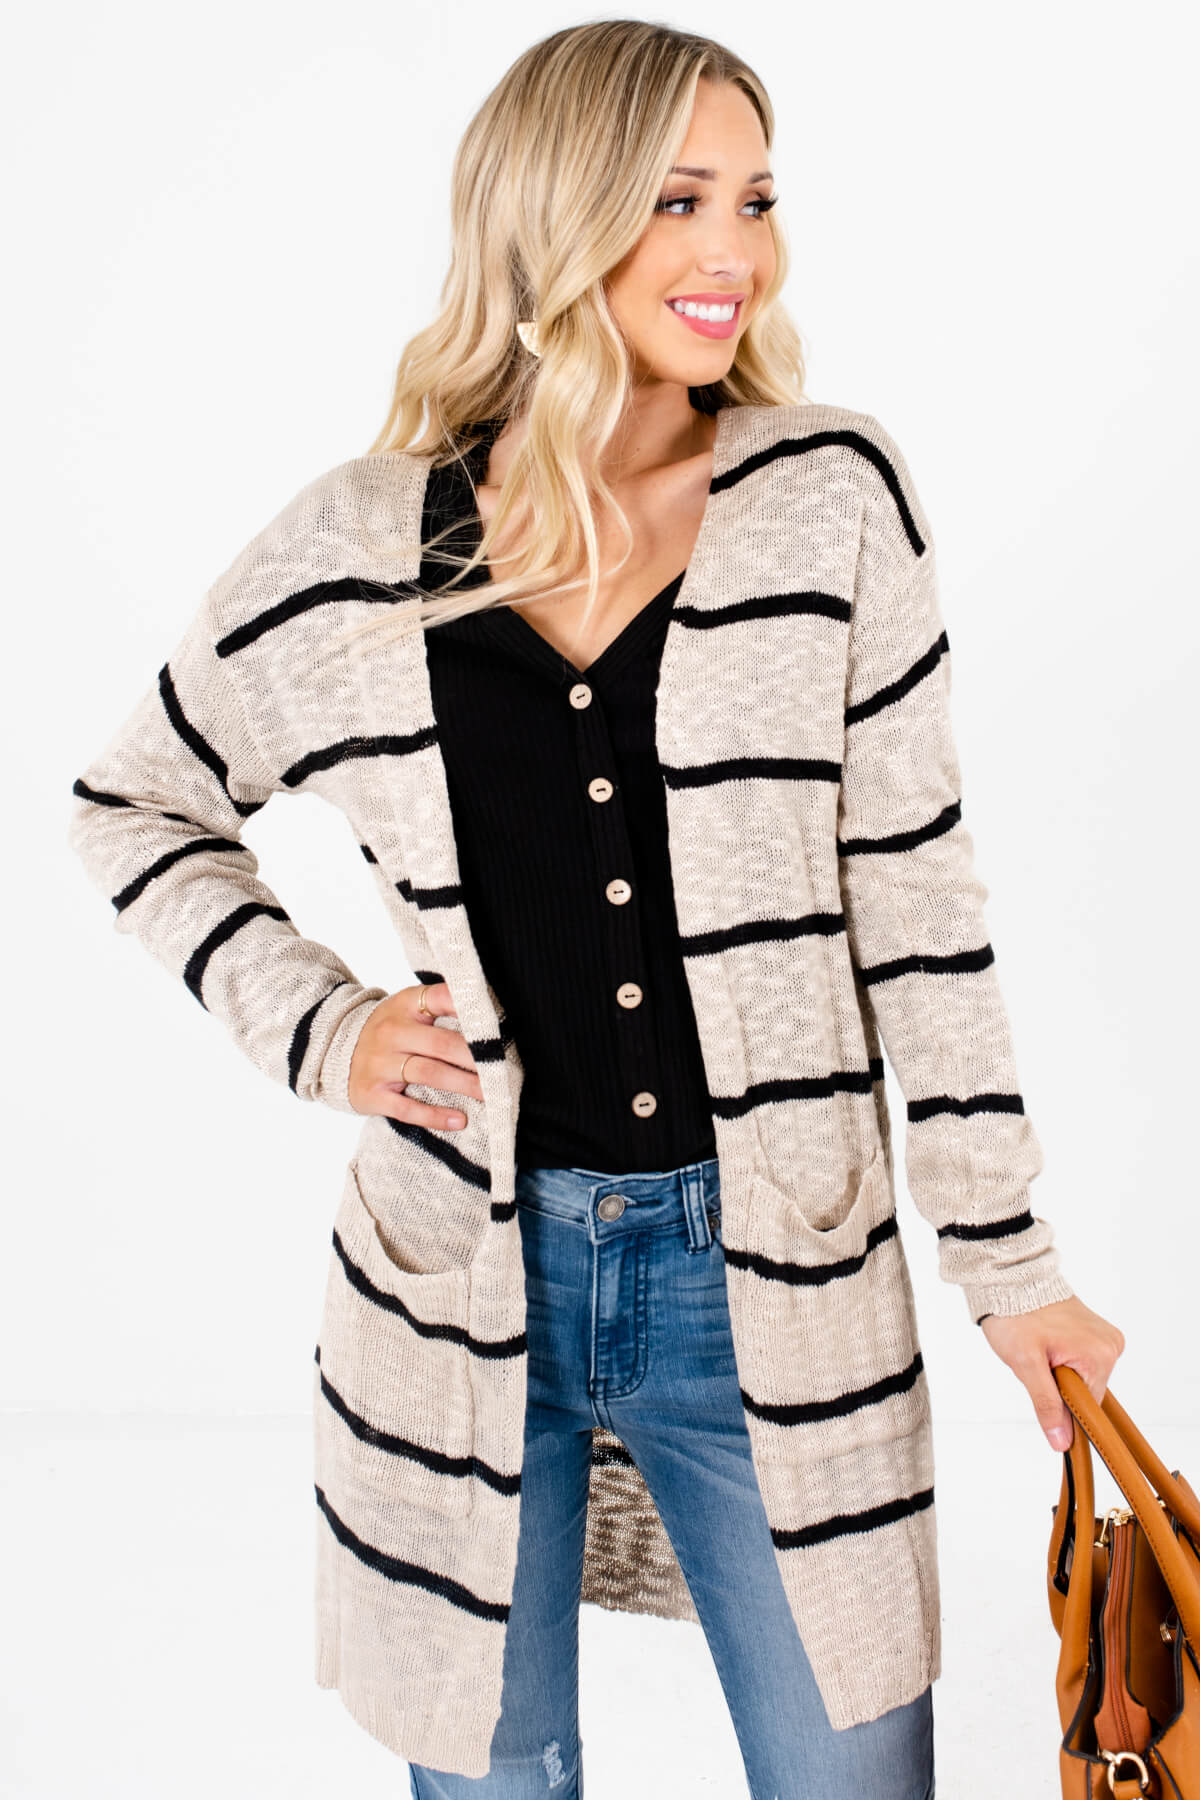 How to Wear the Temperament Striped Coat? - Fabulous Fashion Beauty